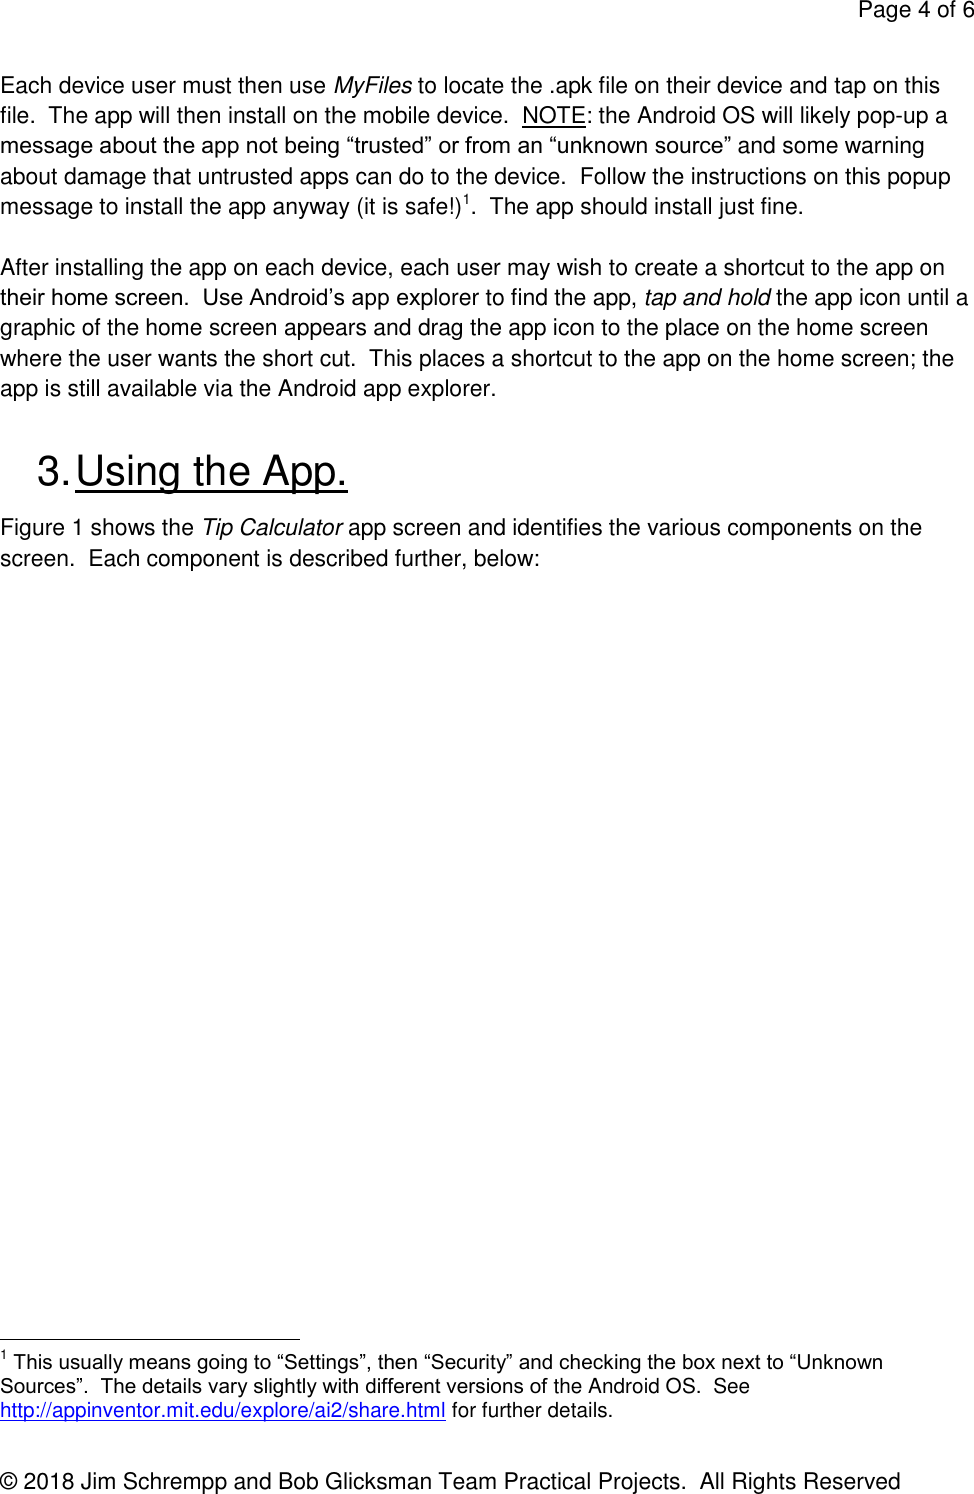 Page 4 of 6 - Tip Calculator Installation And User Manual